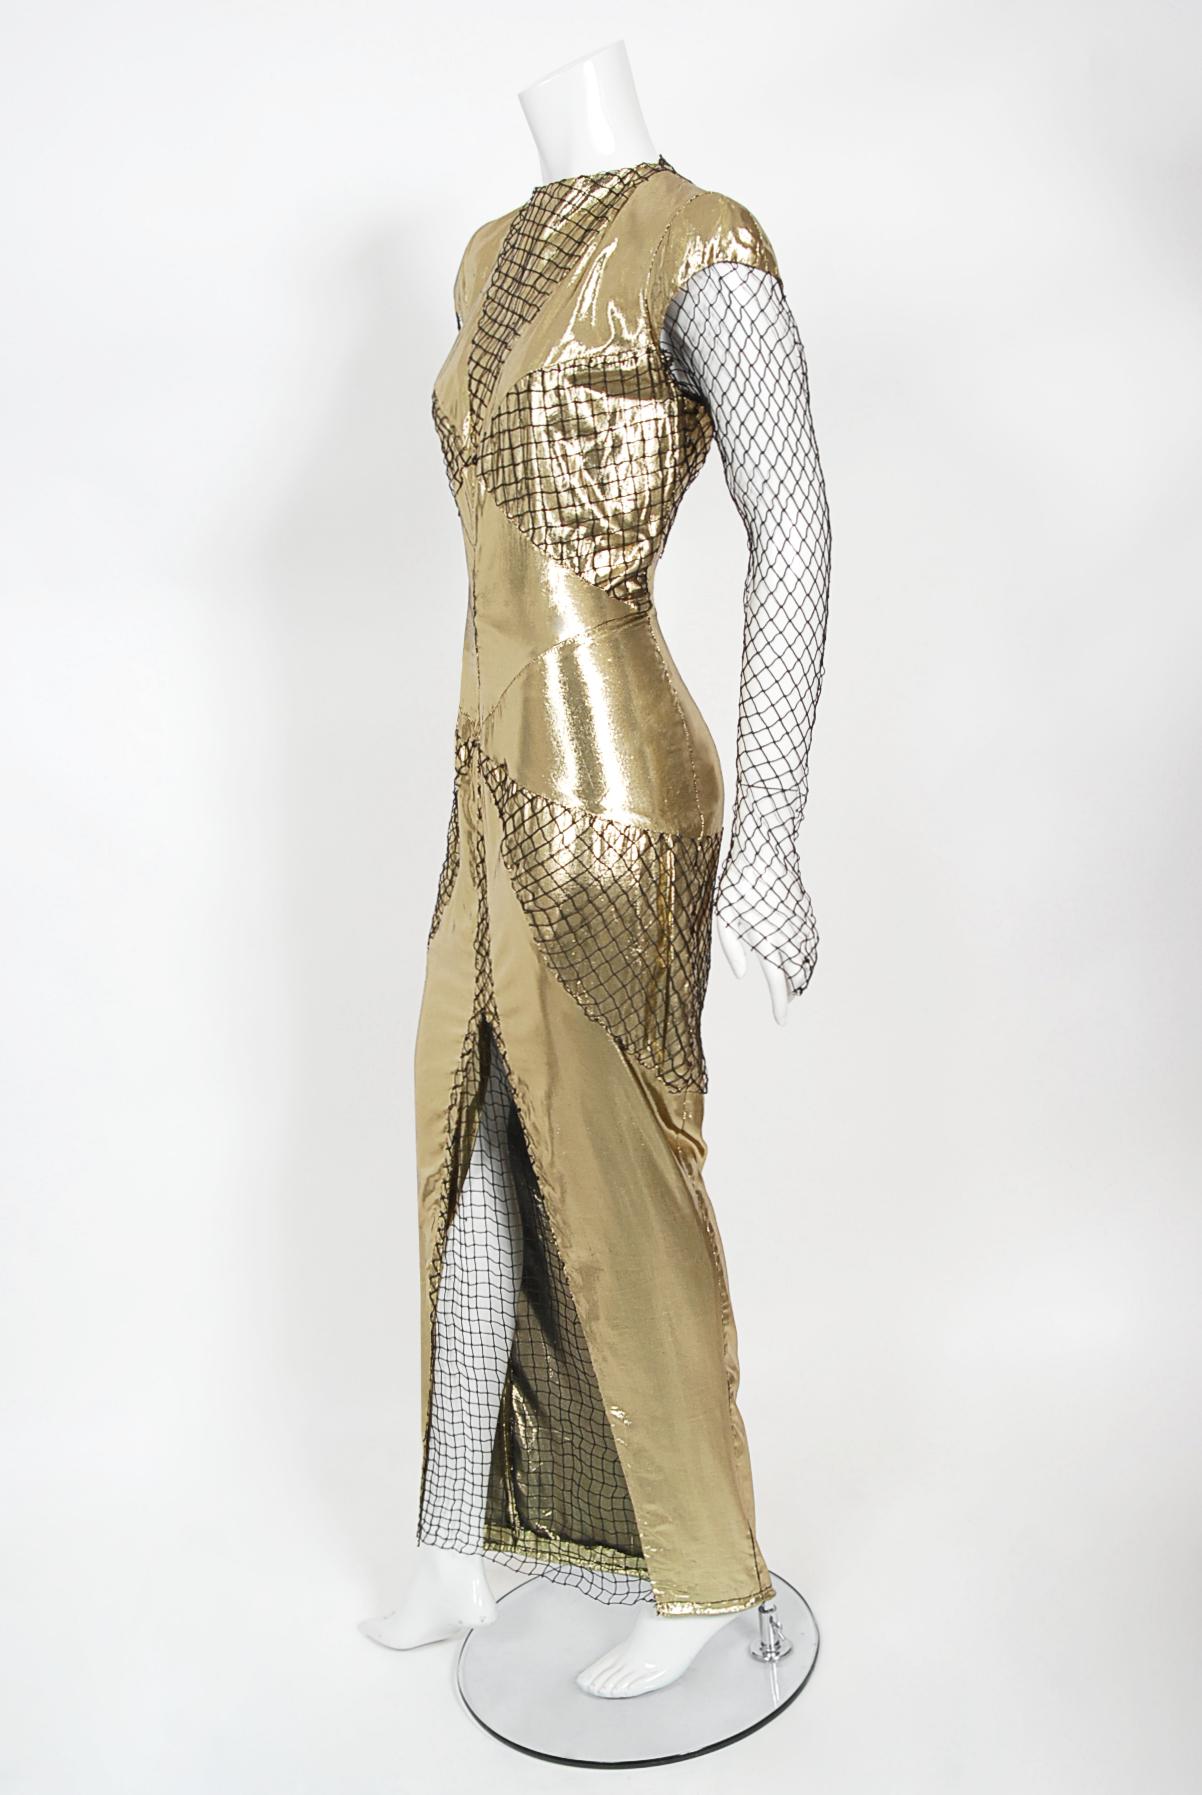 1985 Thierry Mugler Couture Documented Metallic Gold Lamé Fishnet High-Slit Gown For Sale 1